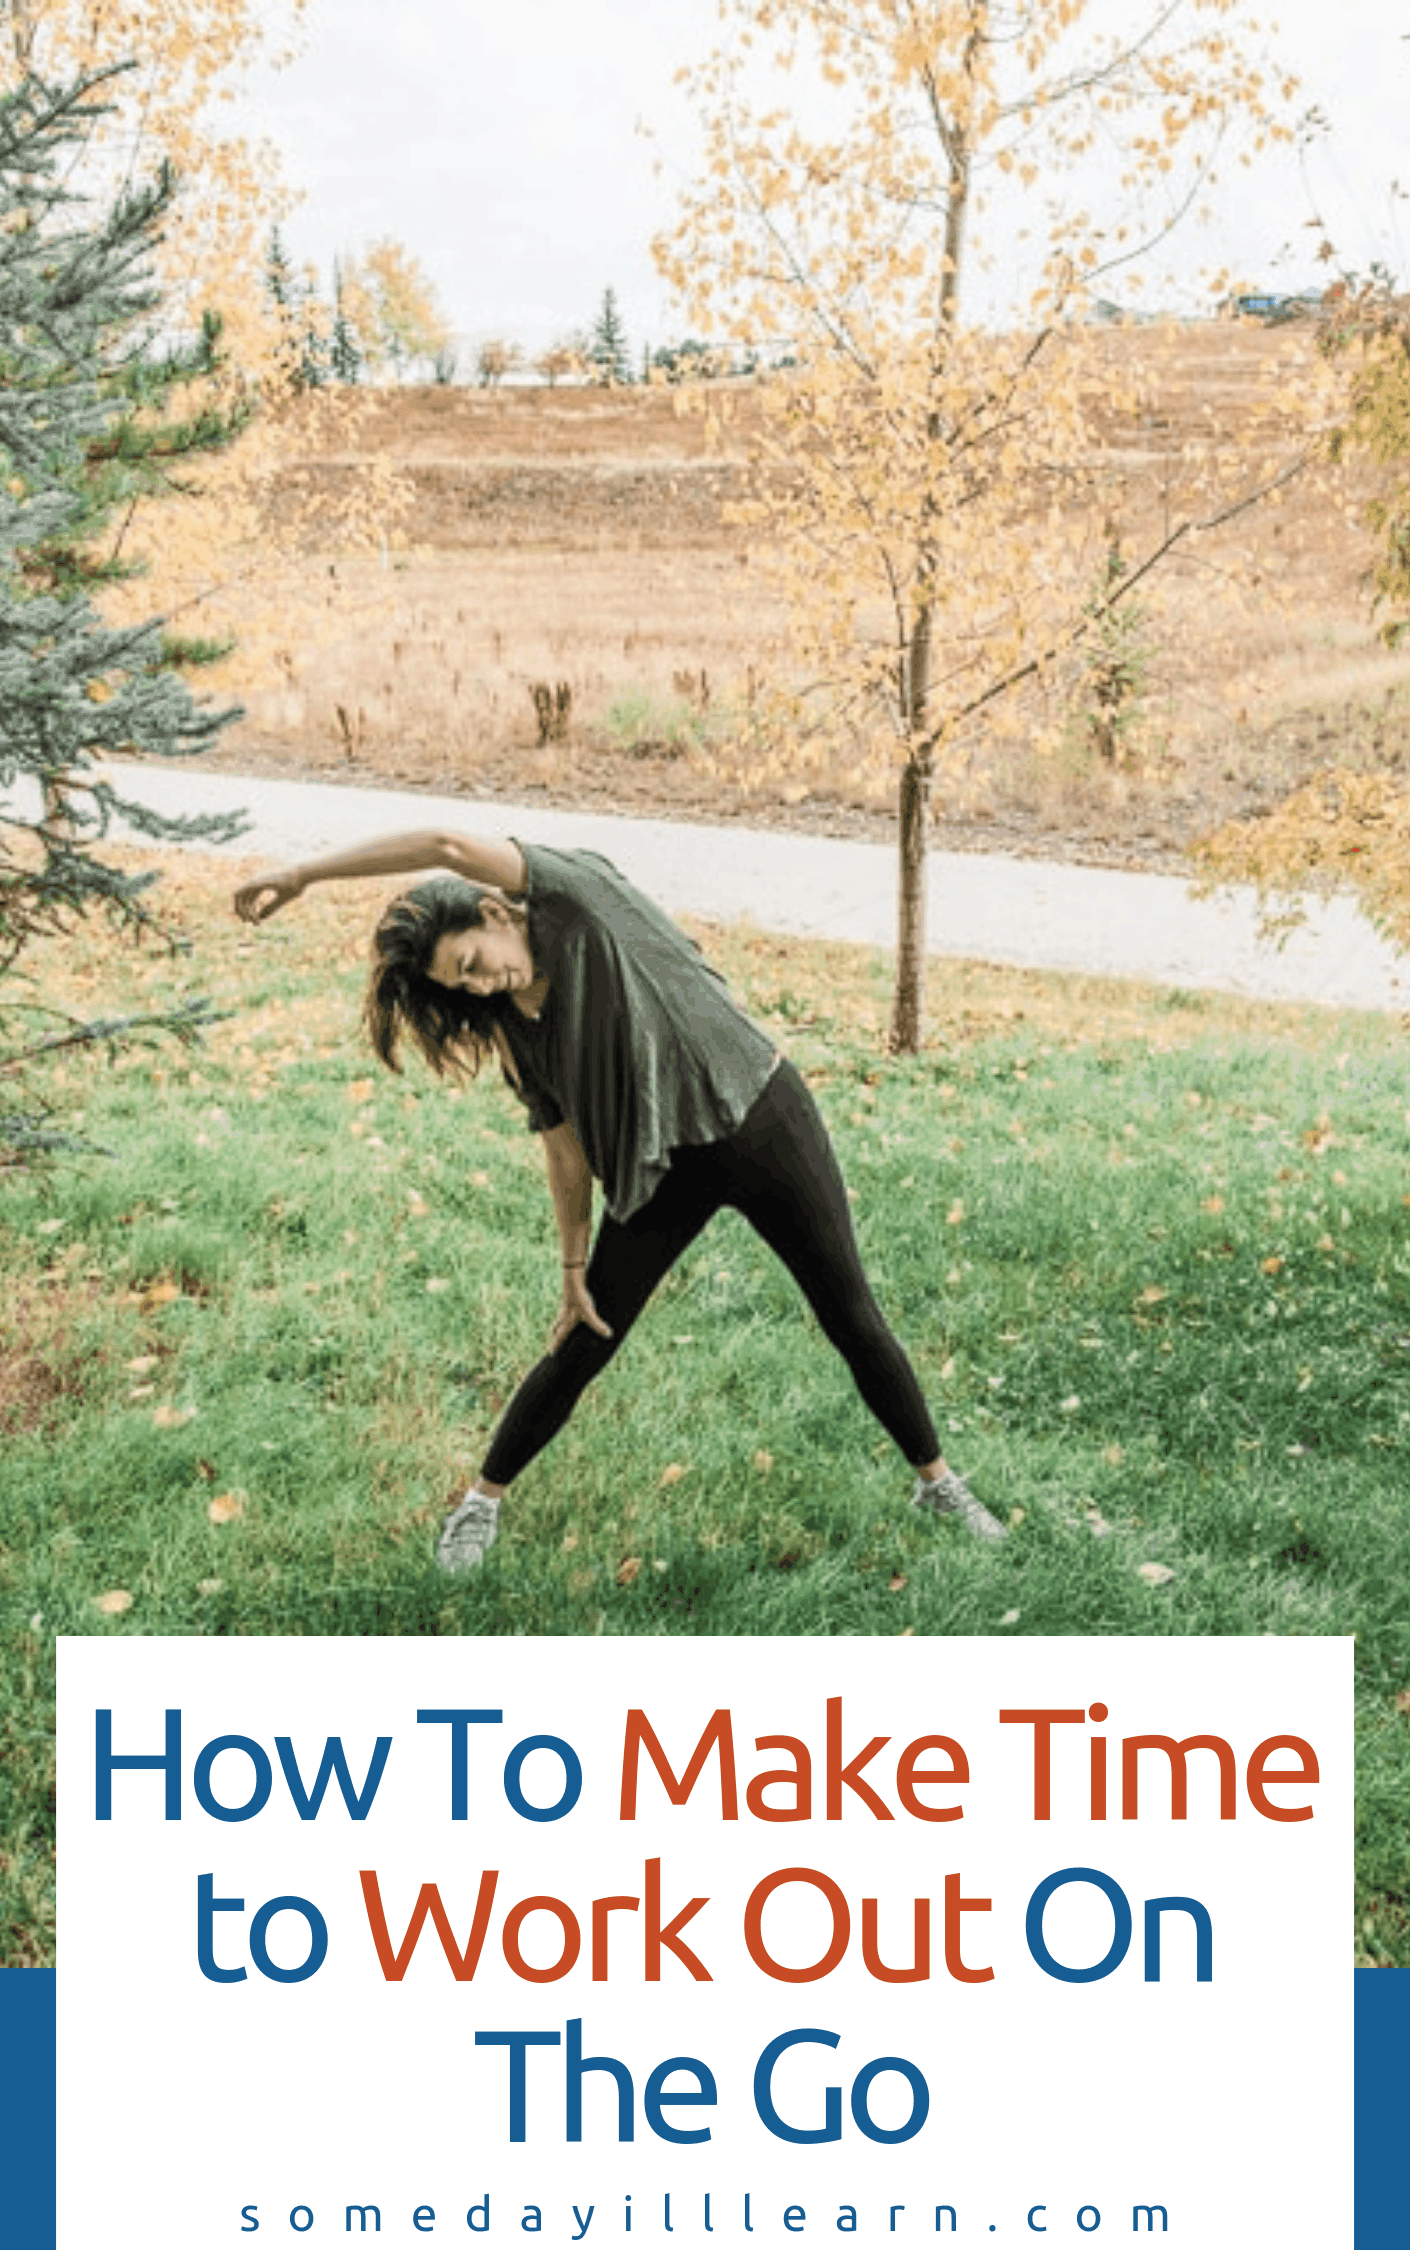 How To Make Time to Work Out On The Go